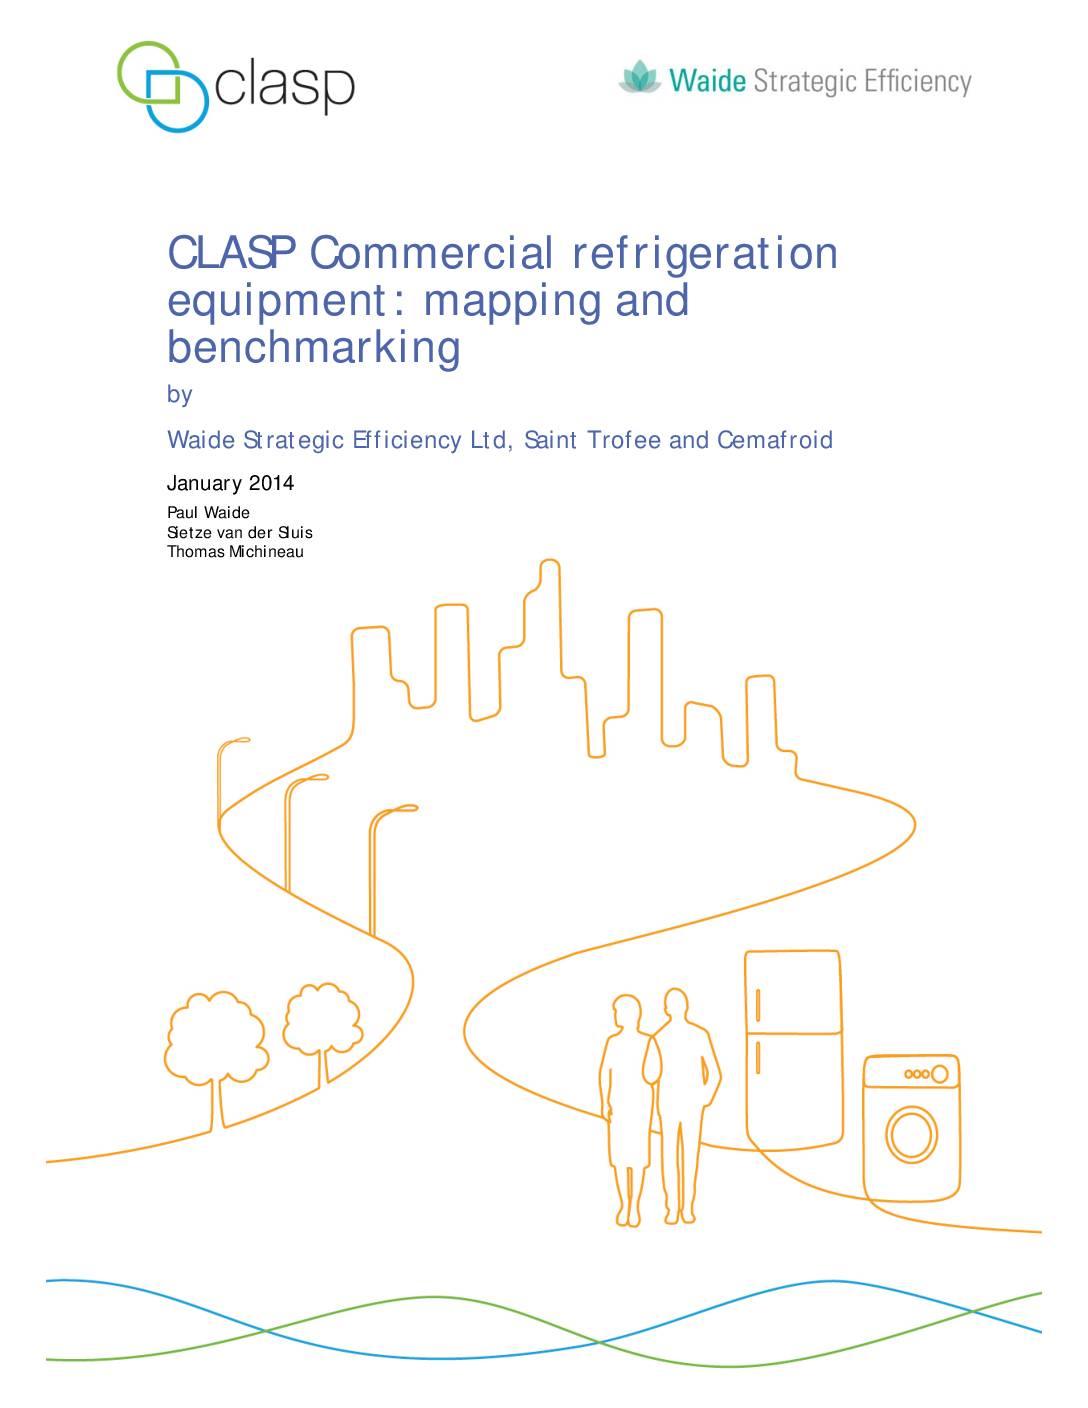 CLASP Commercial refrigeration equipment: mapping and benchmarking